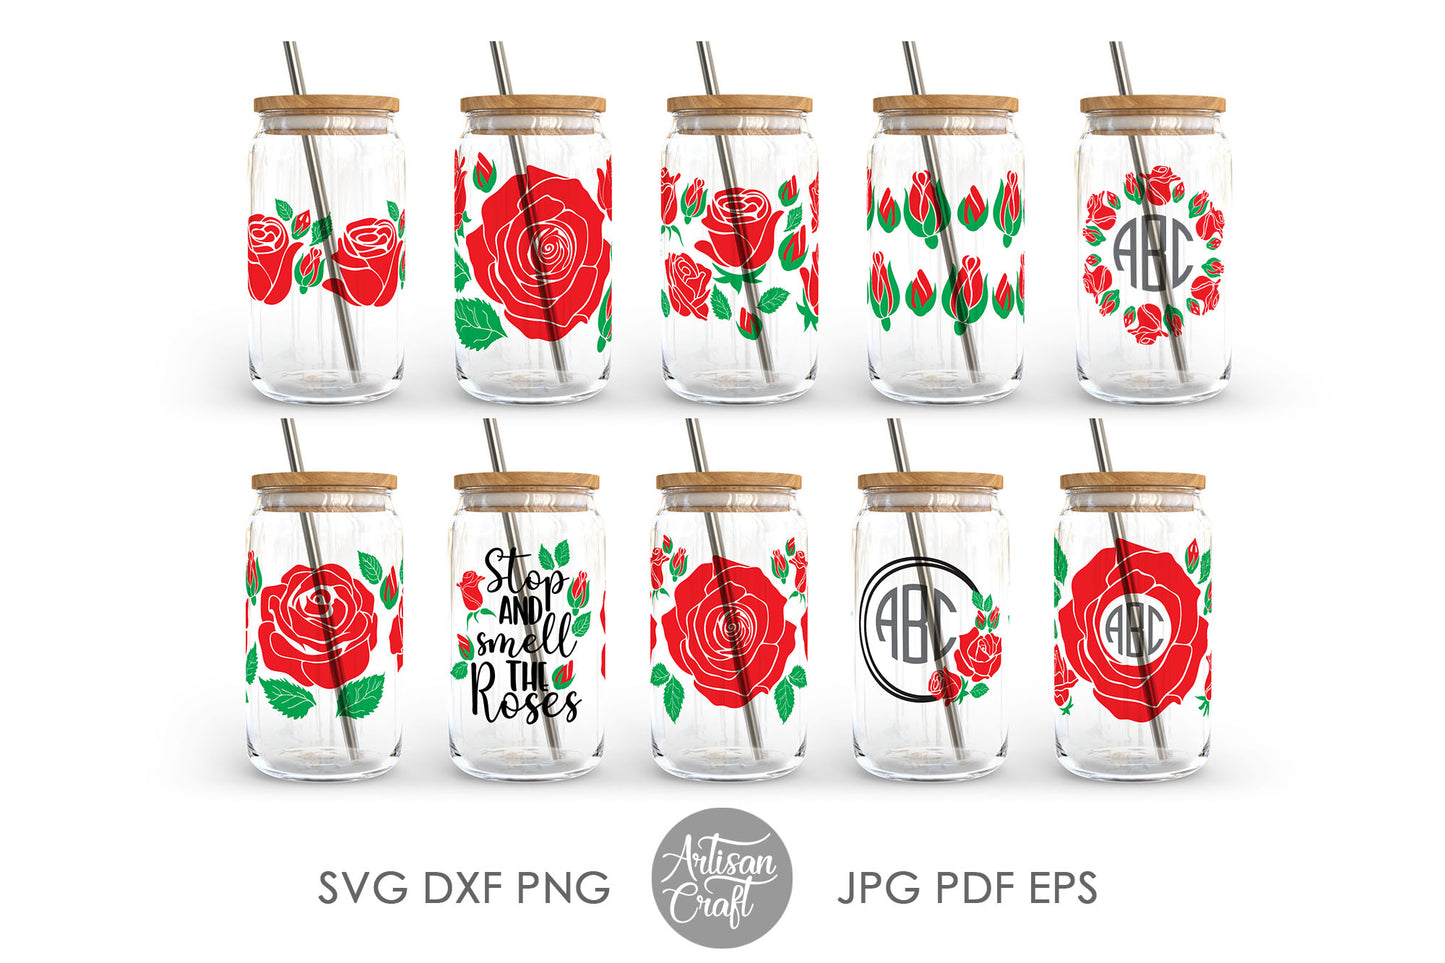 Can Glass SVG with Roses & Rose monogram